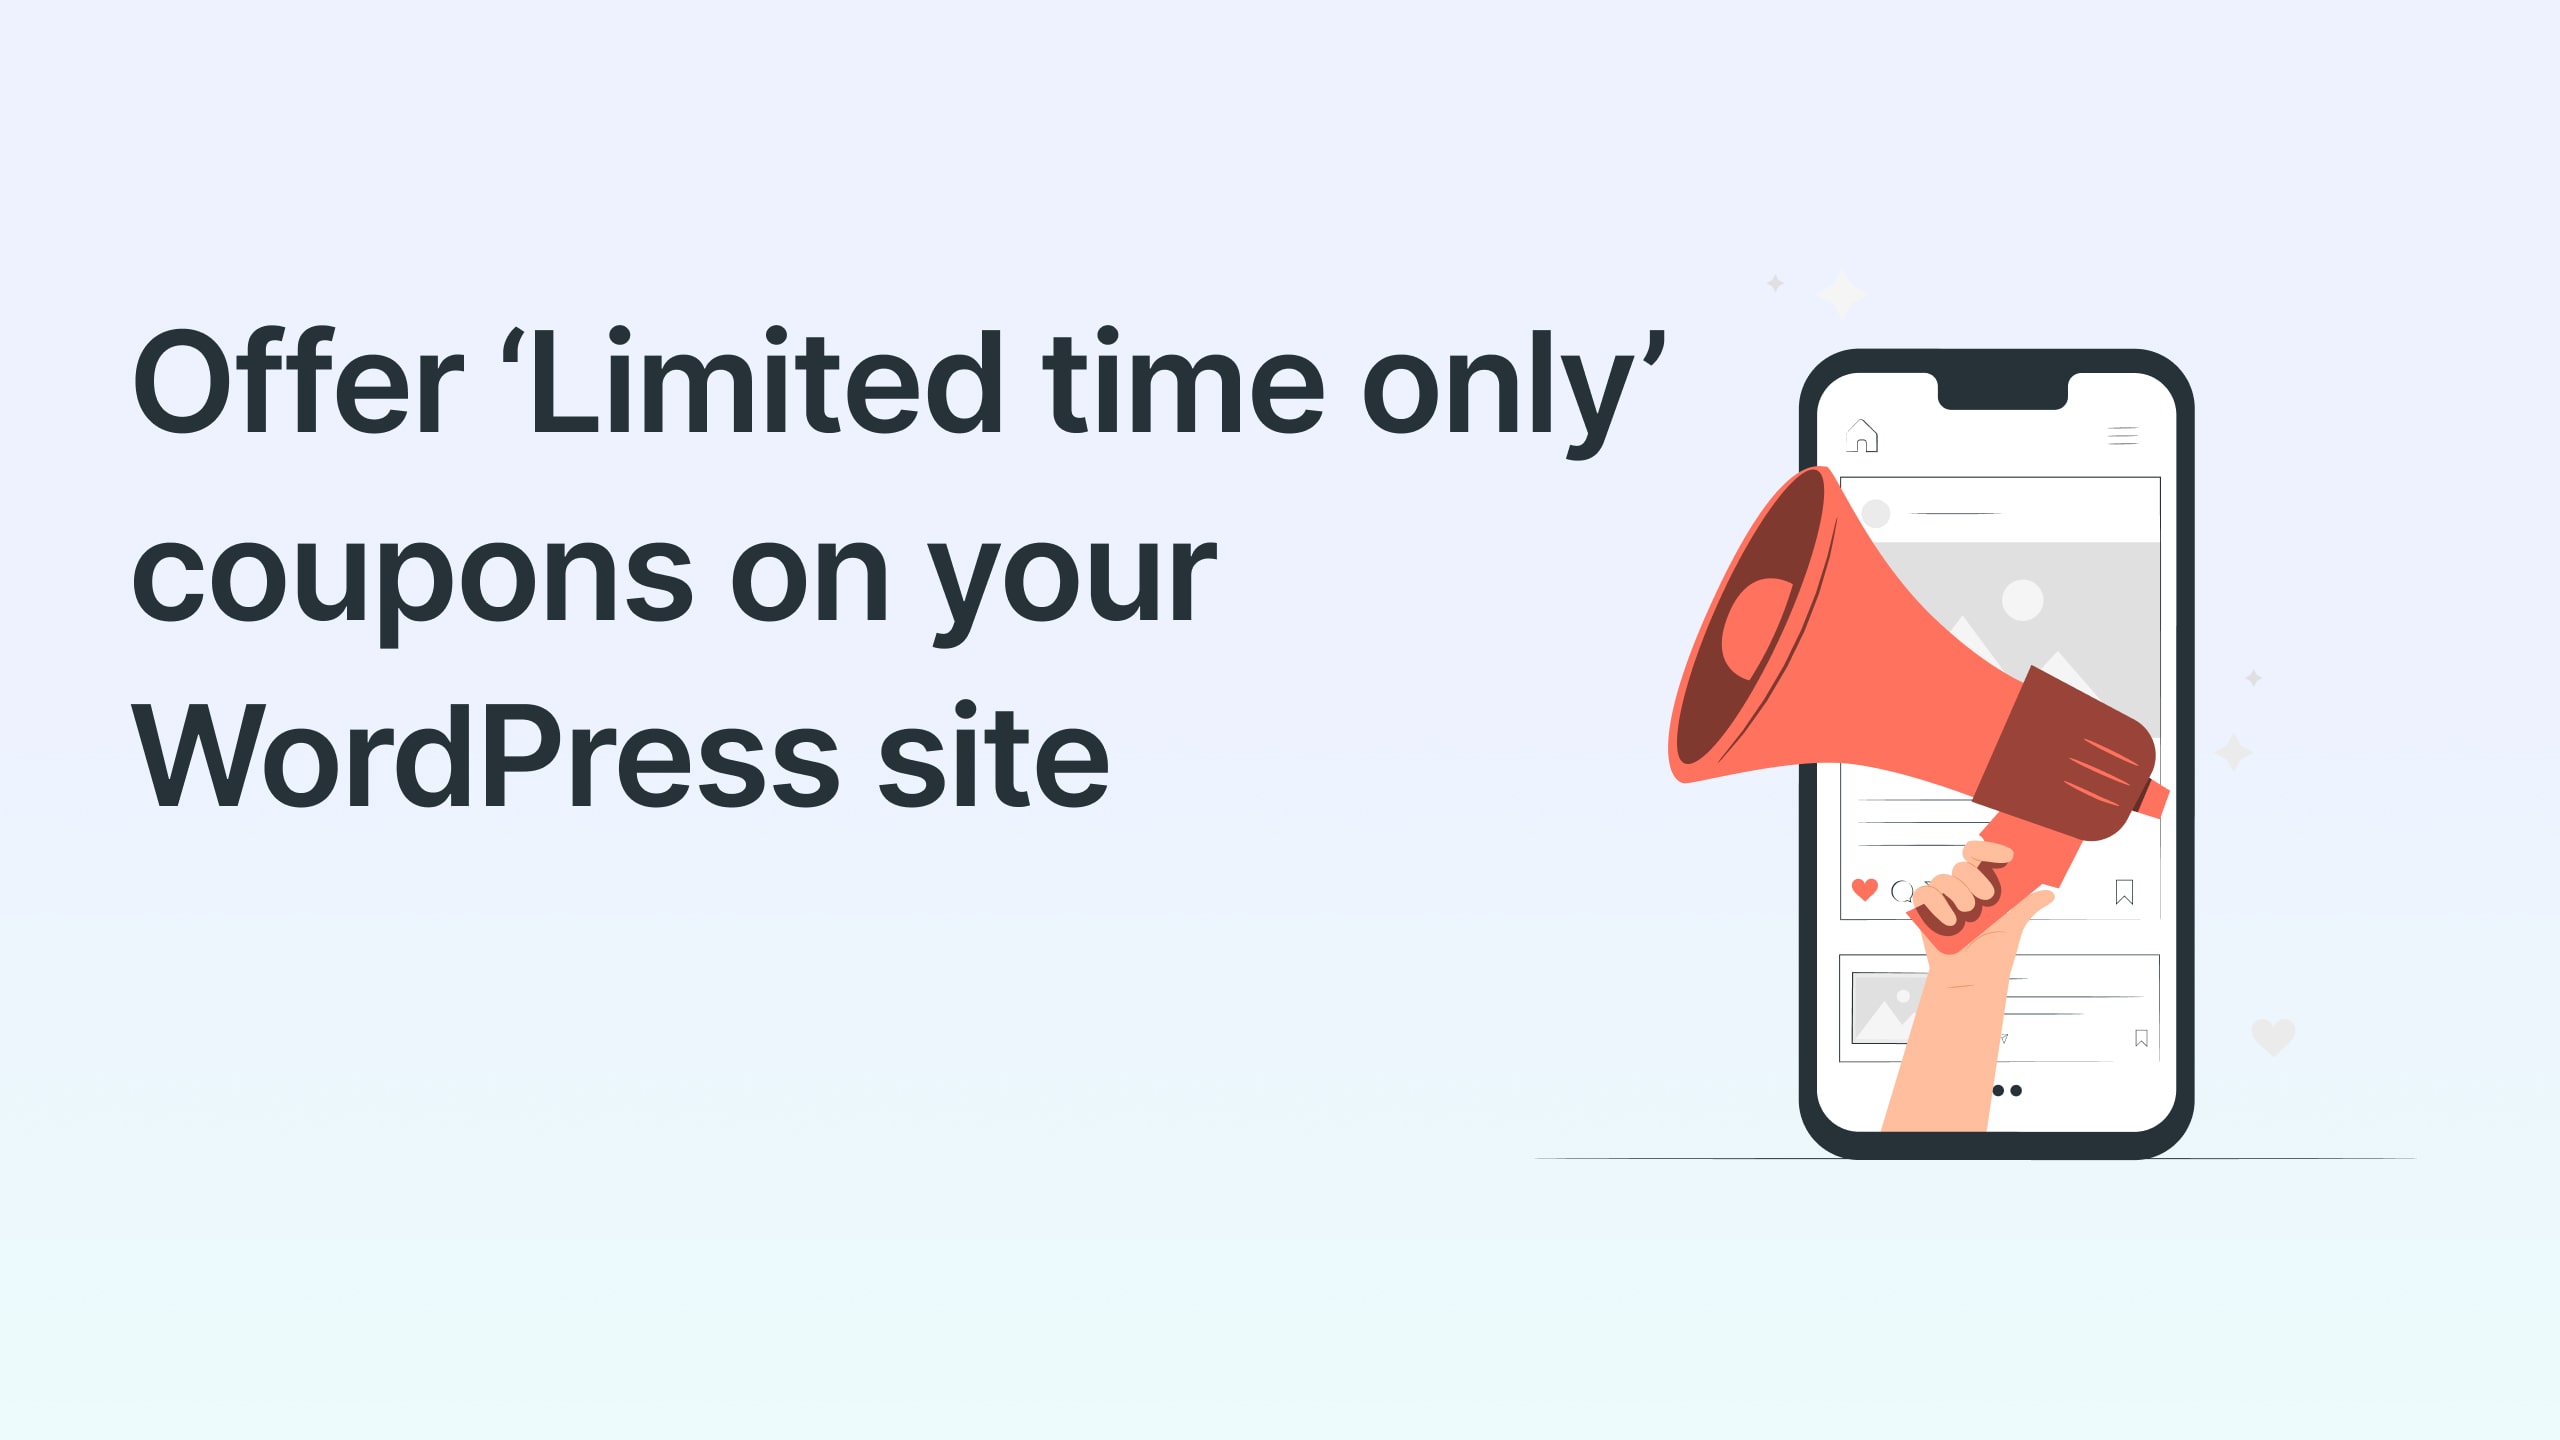 What is a limited time offer and how to create it for a WordPress site?